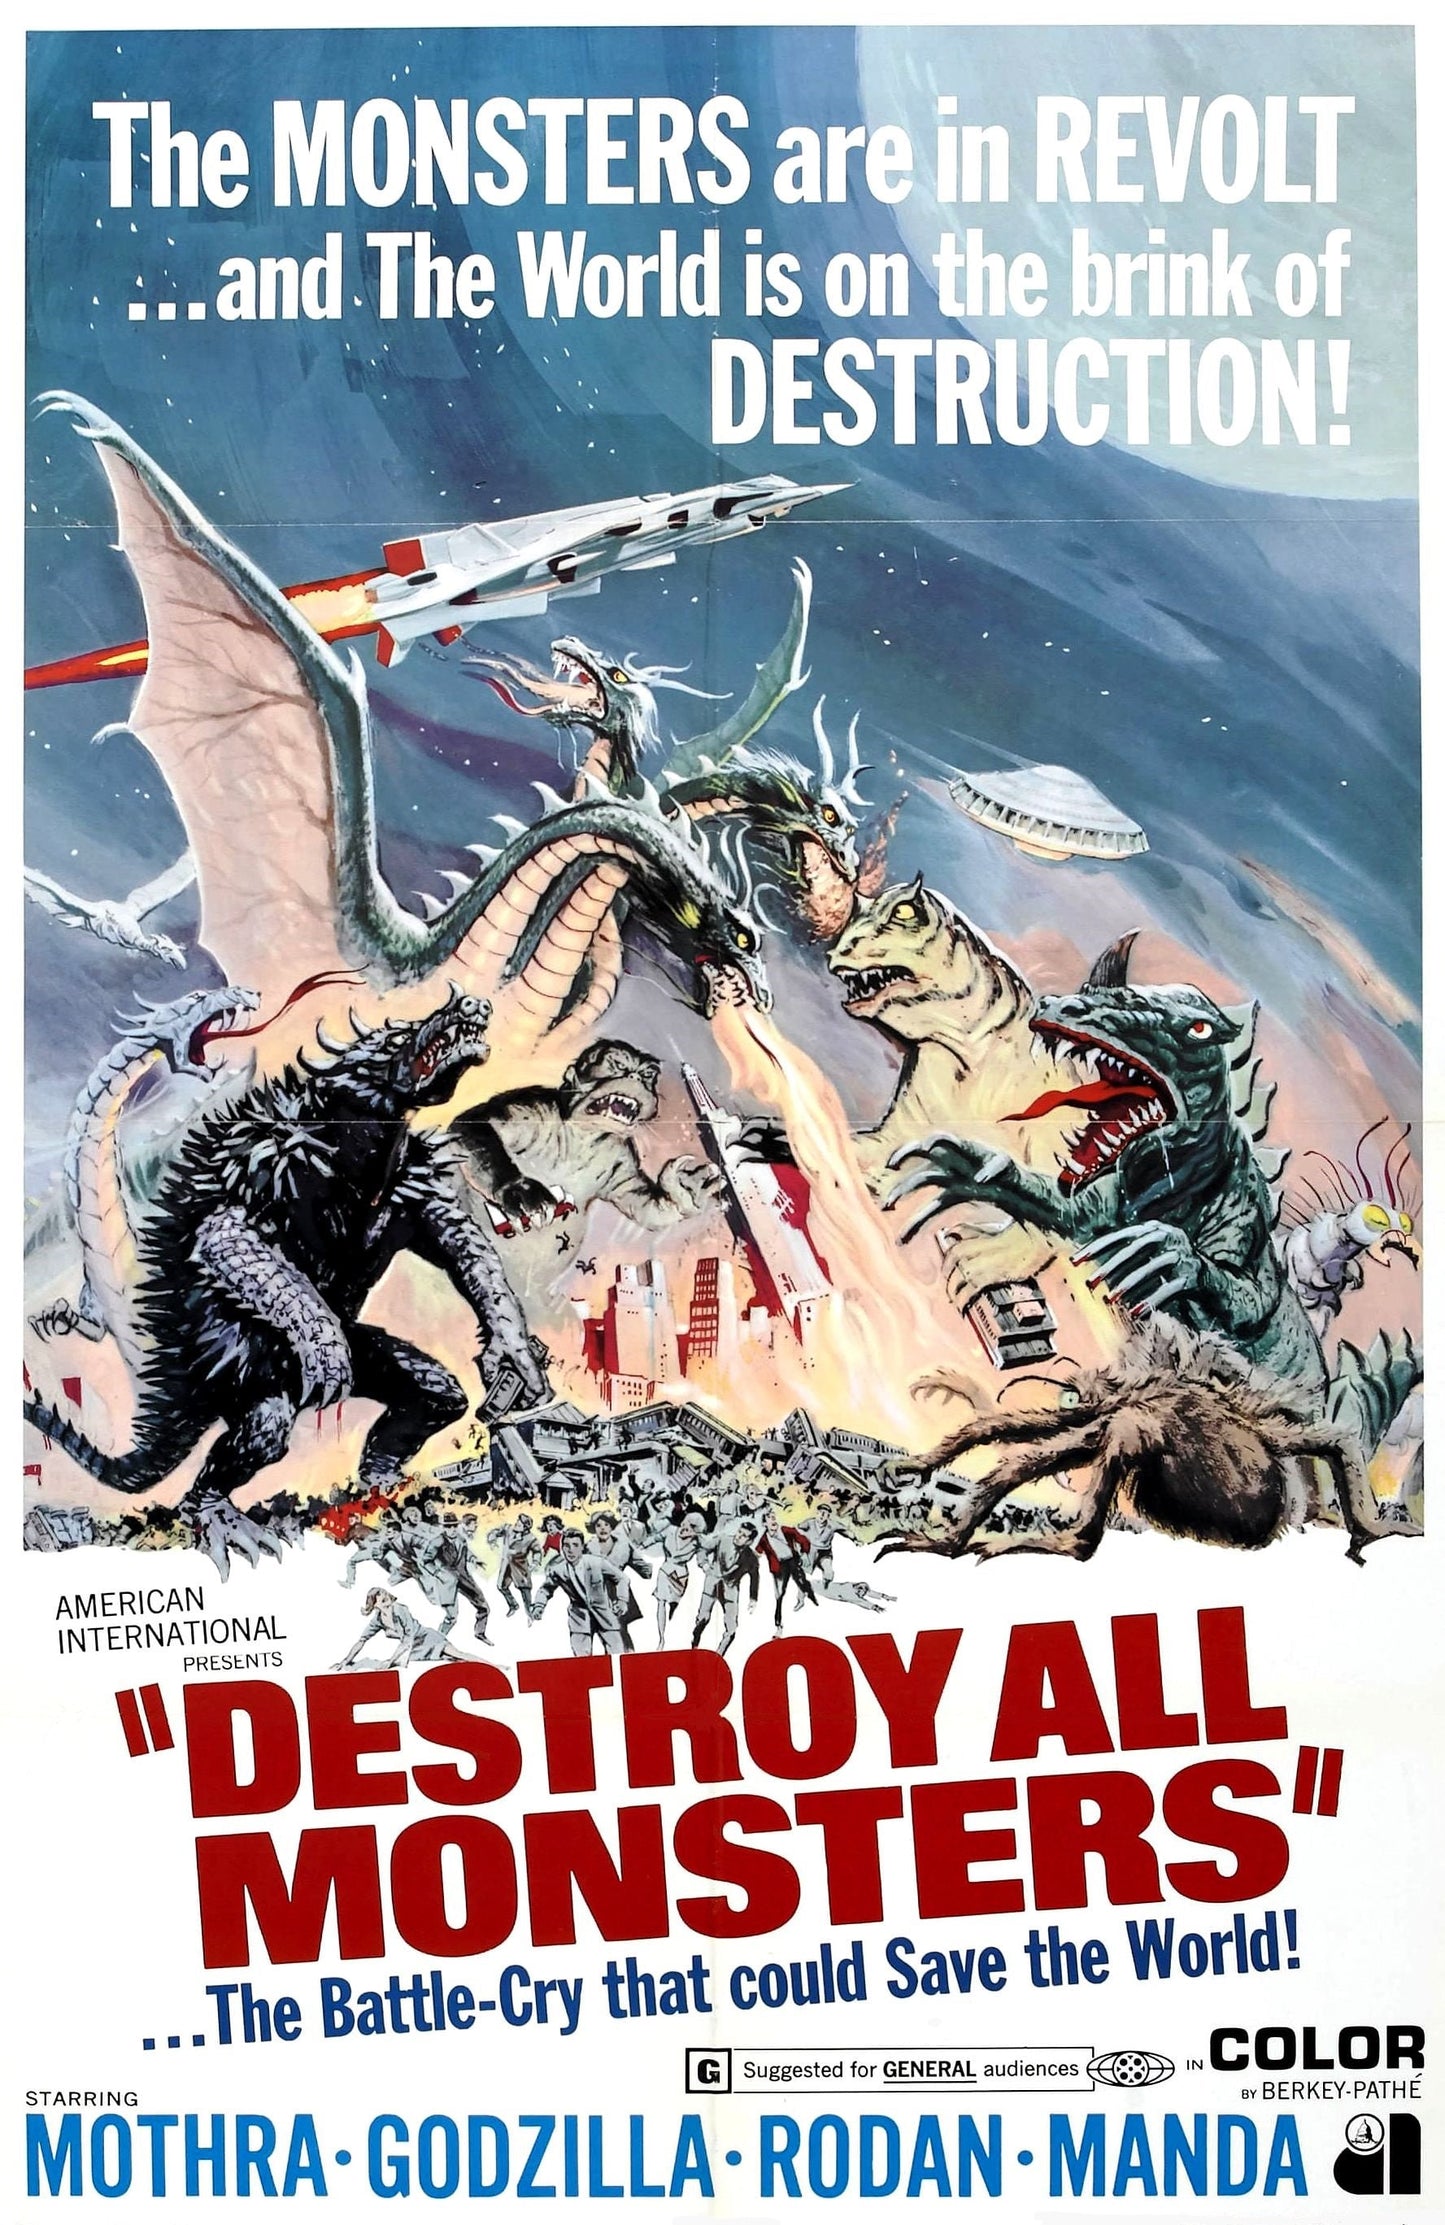 Destroy all Monsters  --Vintage Science Fiction movie poster  (925)